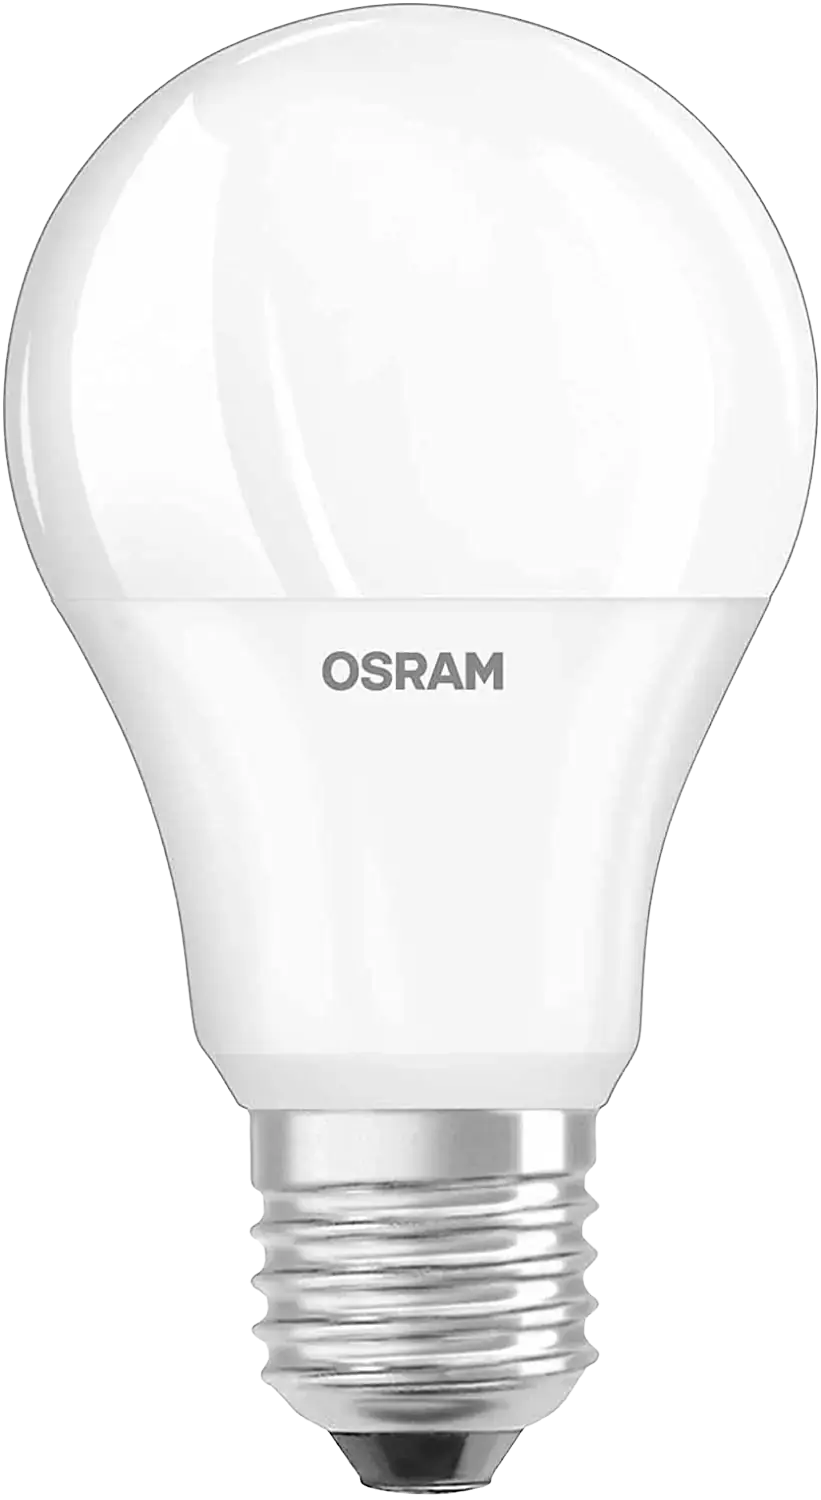 Osram LED Relax and Active Classic A/LED Lamp, Classic Bulb Shape: E27, 220 to 240 V, Frosted, 2700 K, Warm White Cool White, 8 W, 60 W Pack of 1